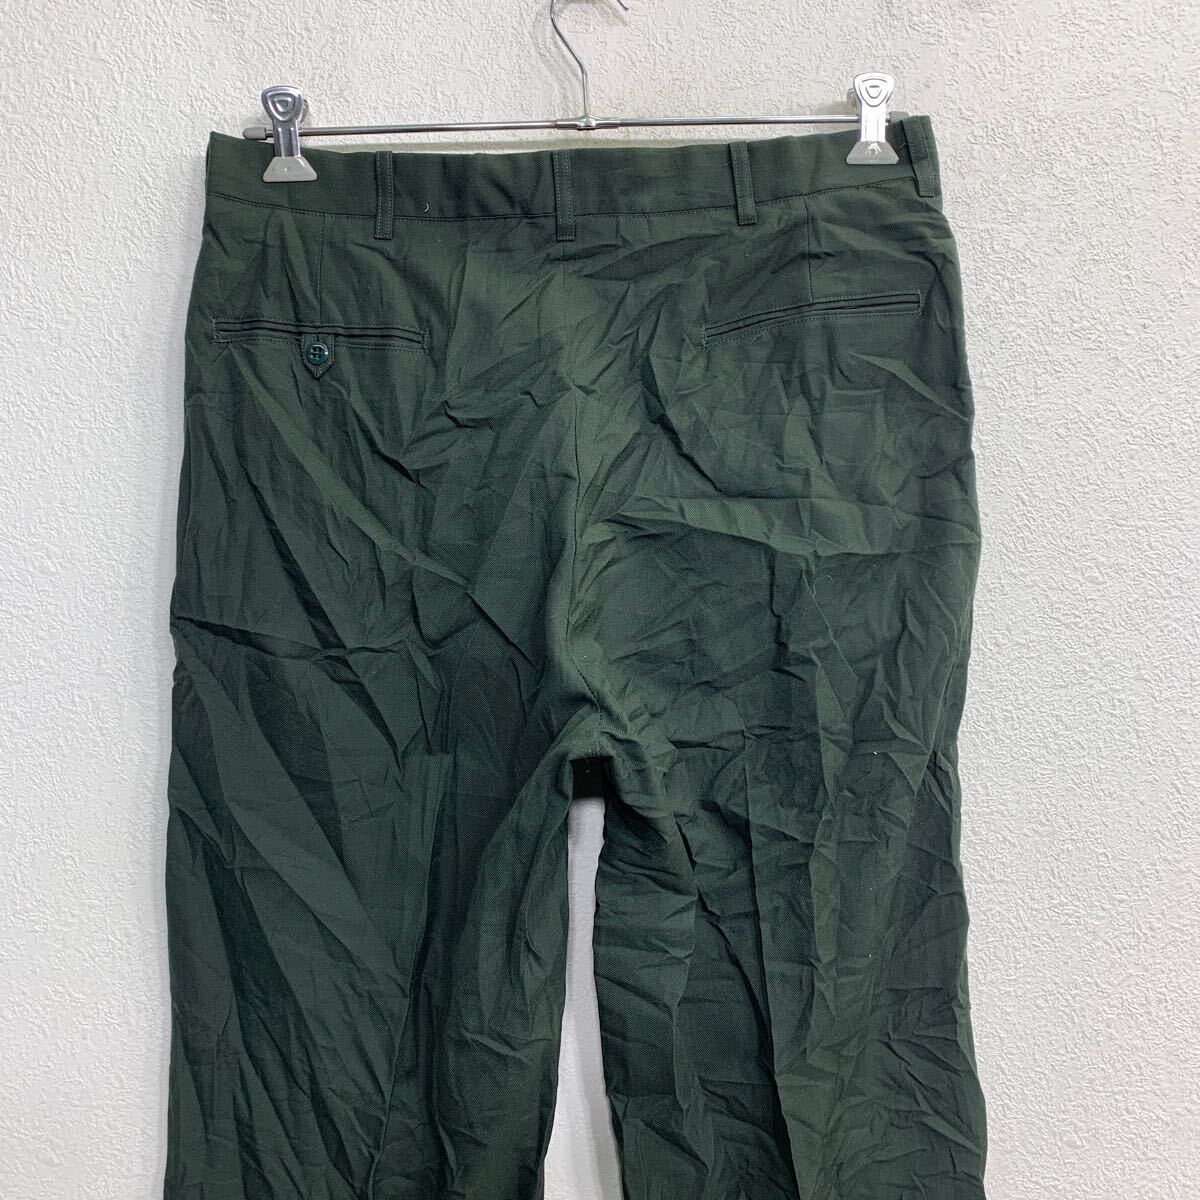 DSCP military trousers W36 big size olive green old clothes . America buying up 2403-610